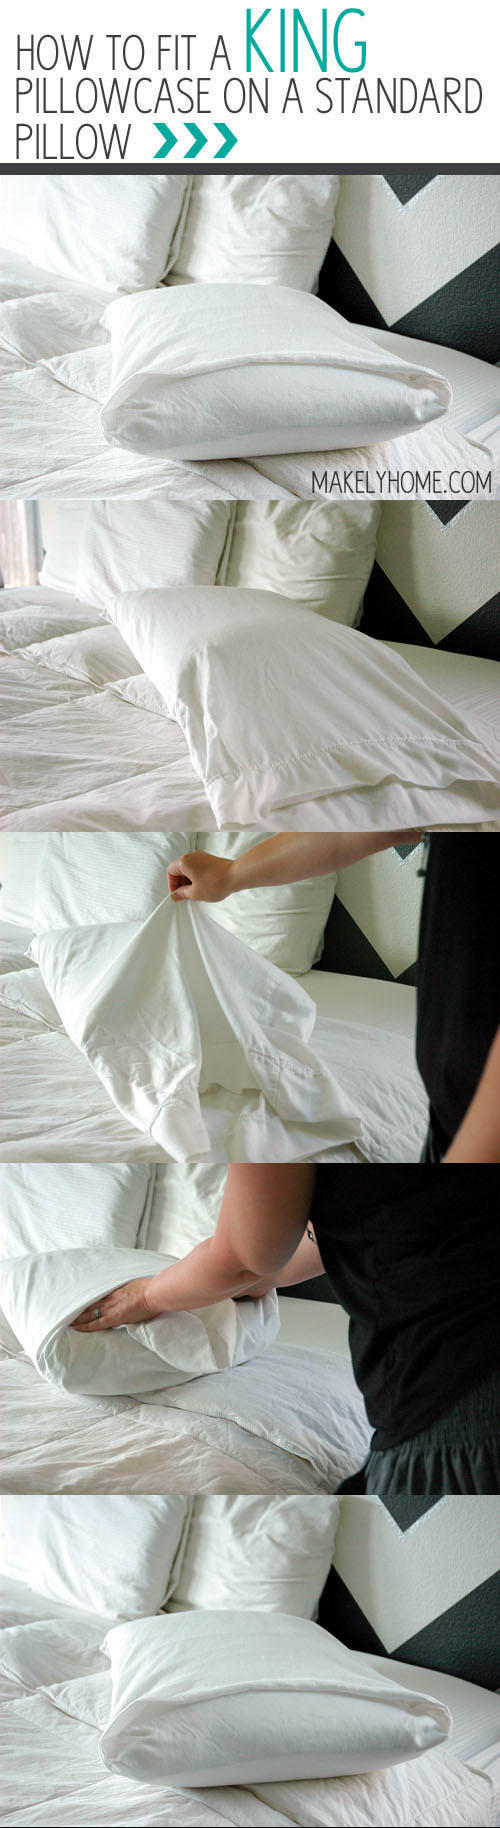 Tuck in the extra parts of your king pillowcases and smooth over to fit your standard pillow better.